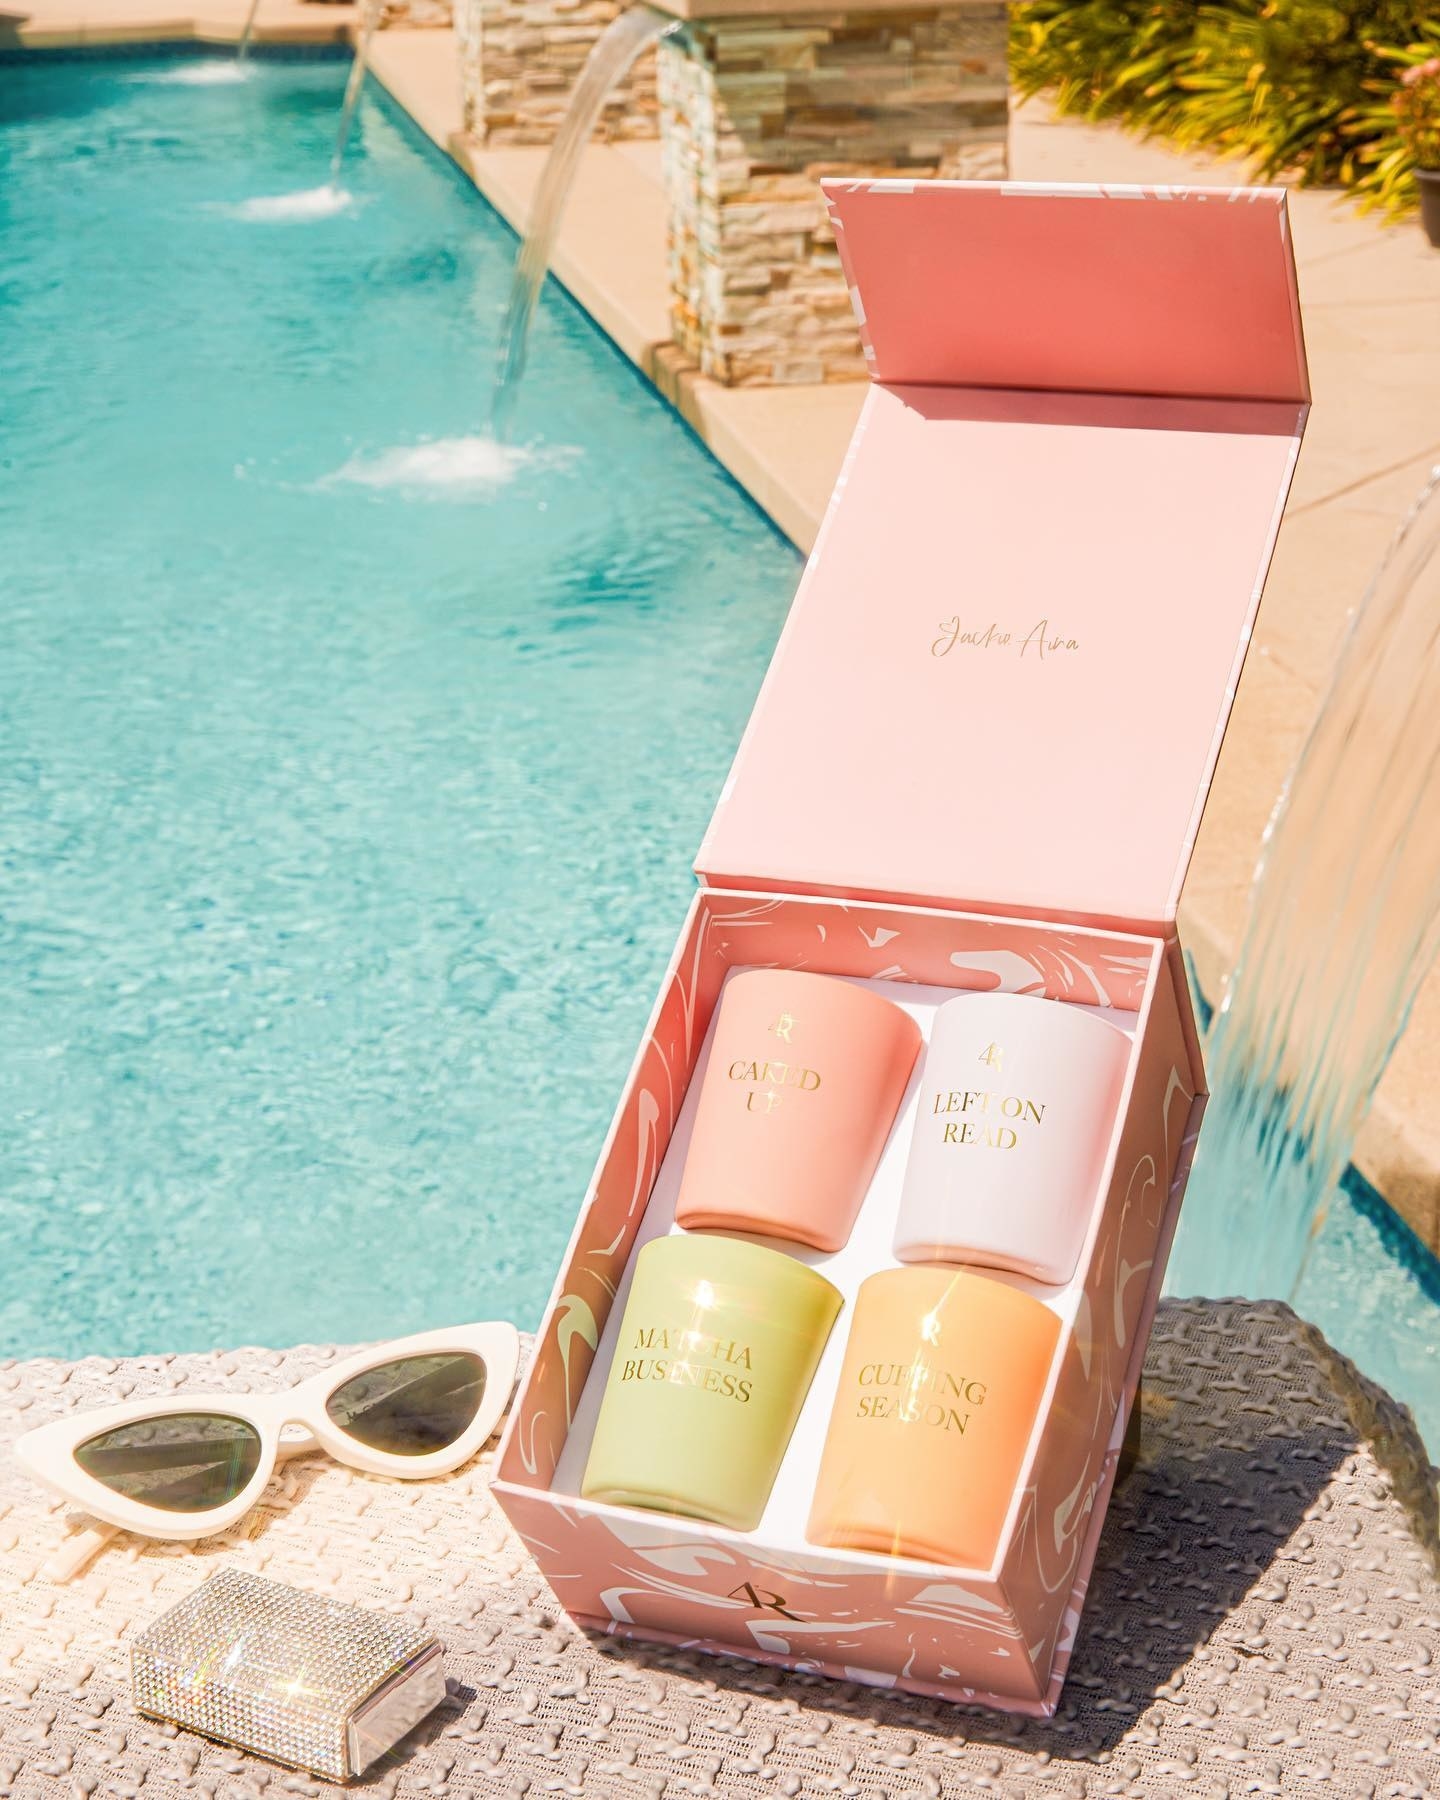 A box of candles is shown next to a pool